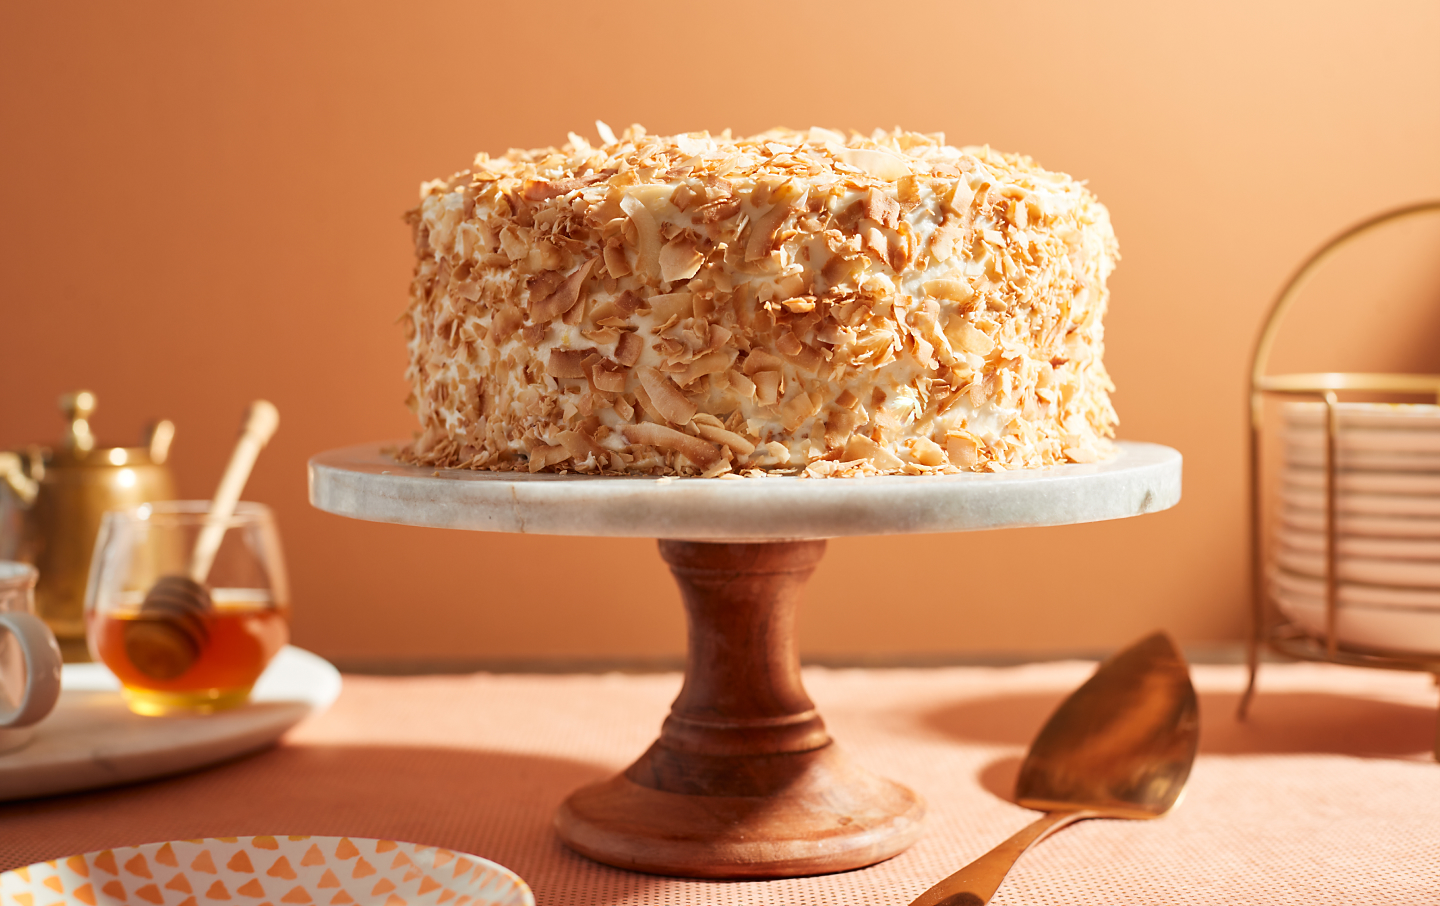 Cake covered in toasted coconut flakes on a cake stand